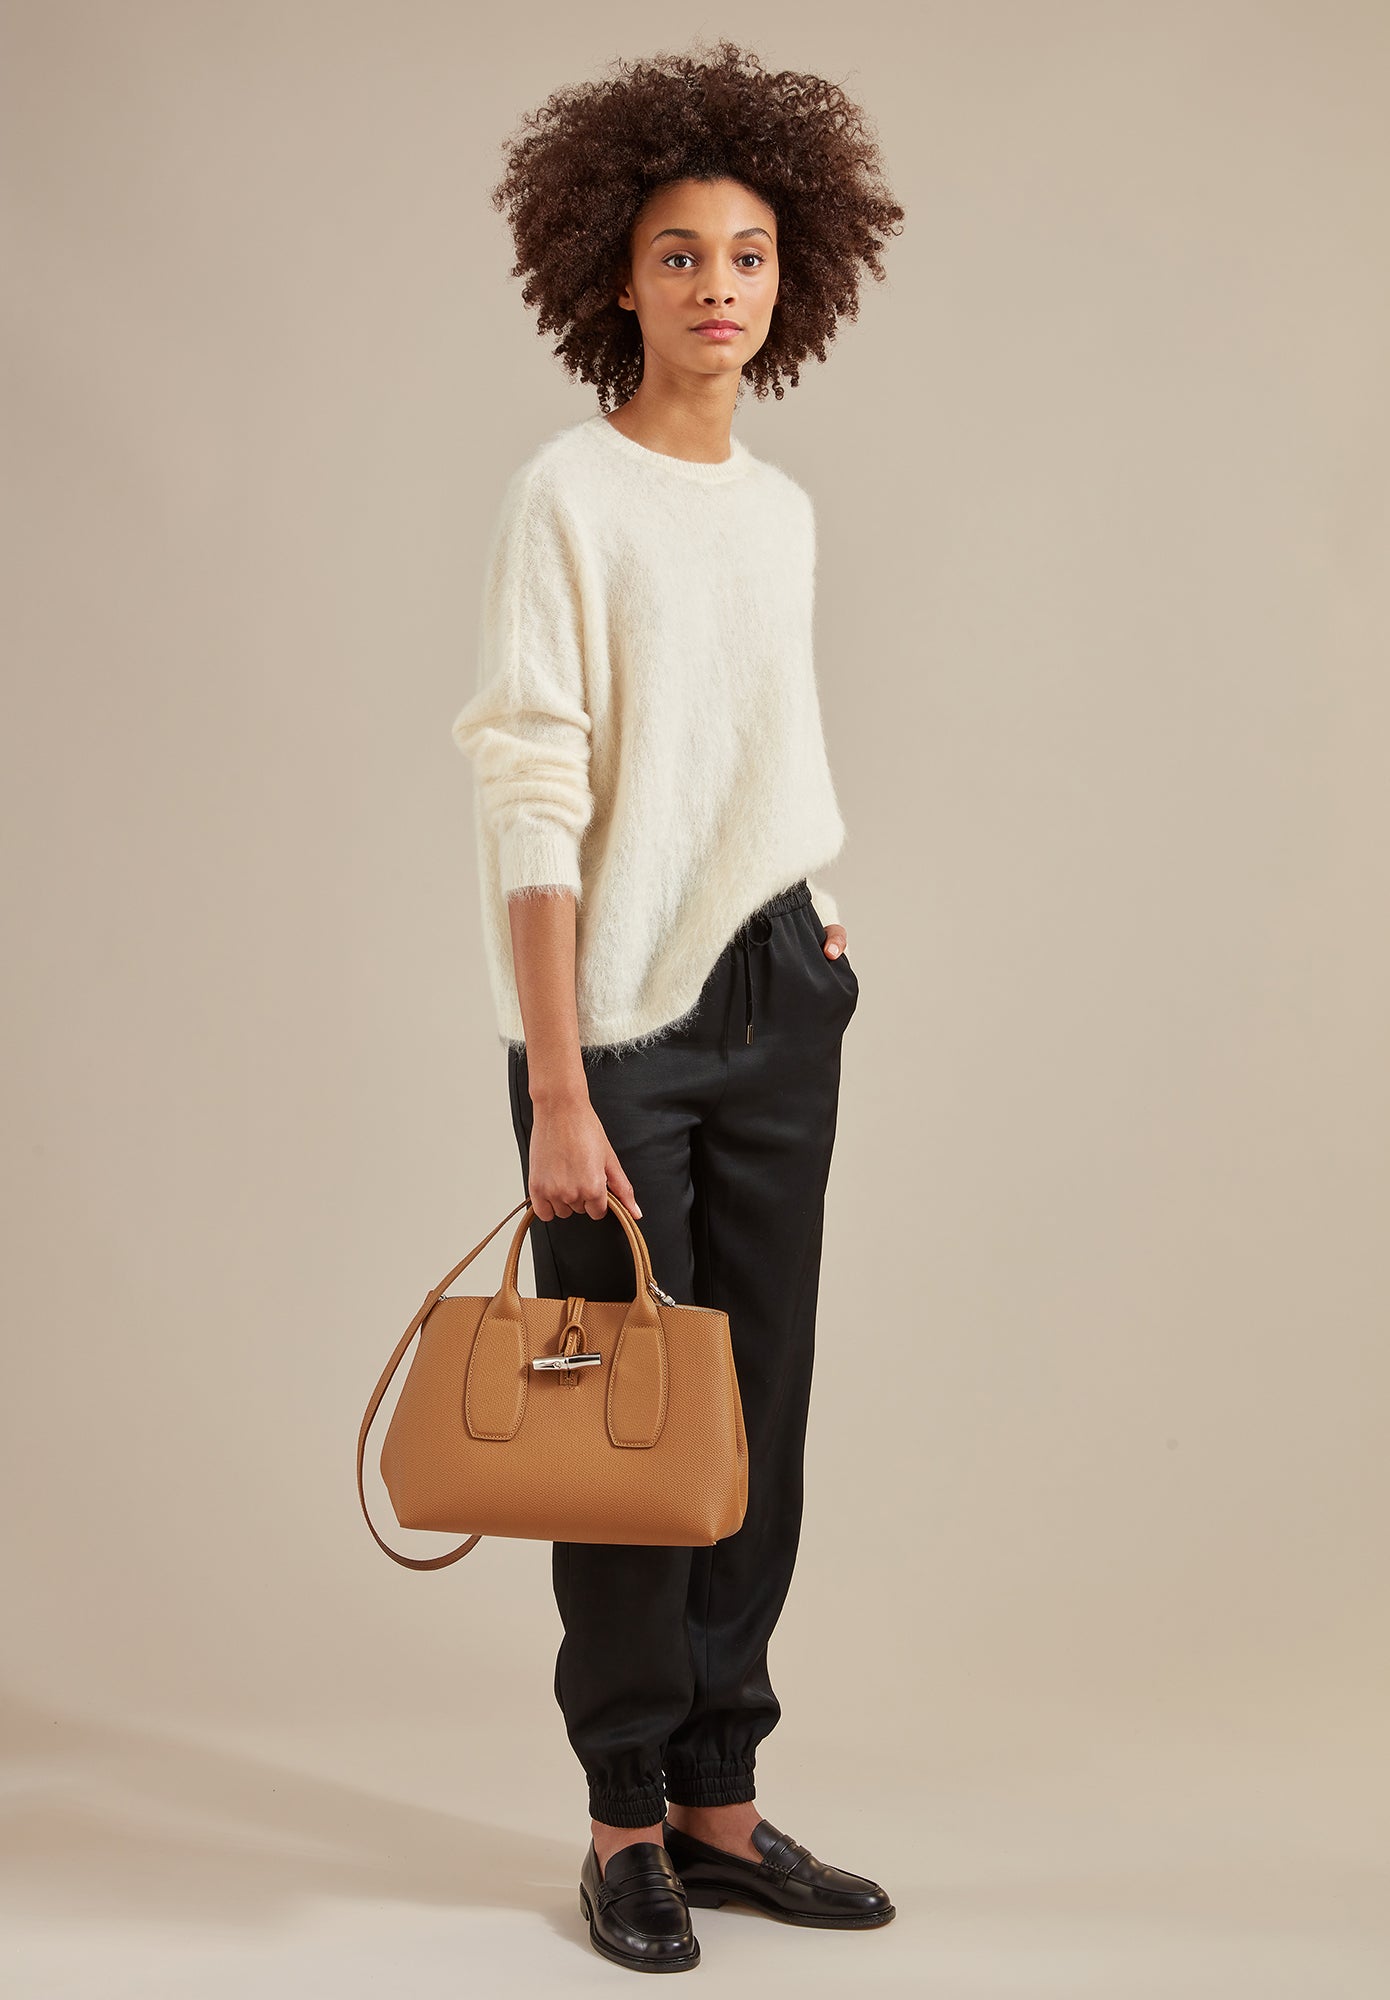 Metiss Designer Wallet Tote: Luxury Shoulder Bag With Square Hasp, High  Quality Letter Flip, And Hobo Style For Women From Jacquemusbag, $58.61 |  DHgate.Com